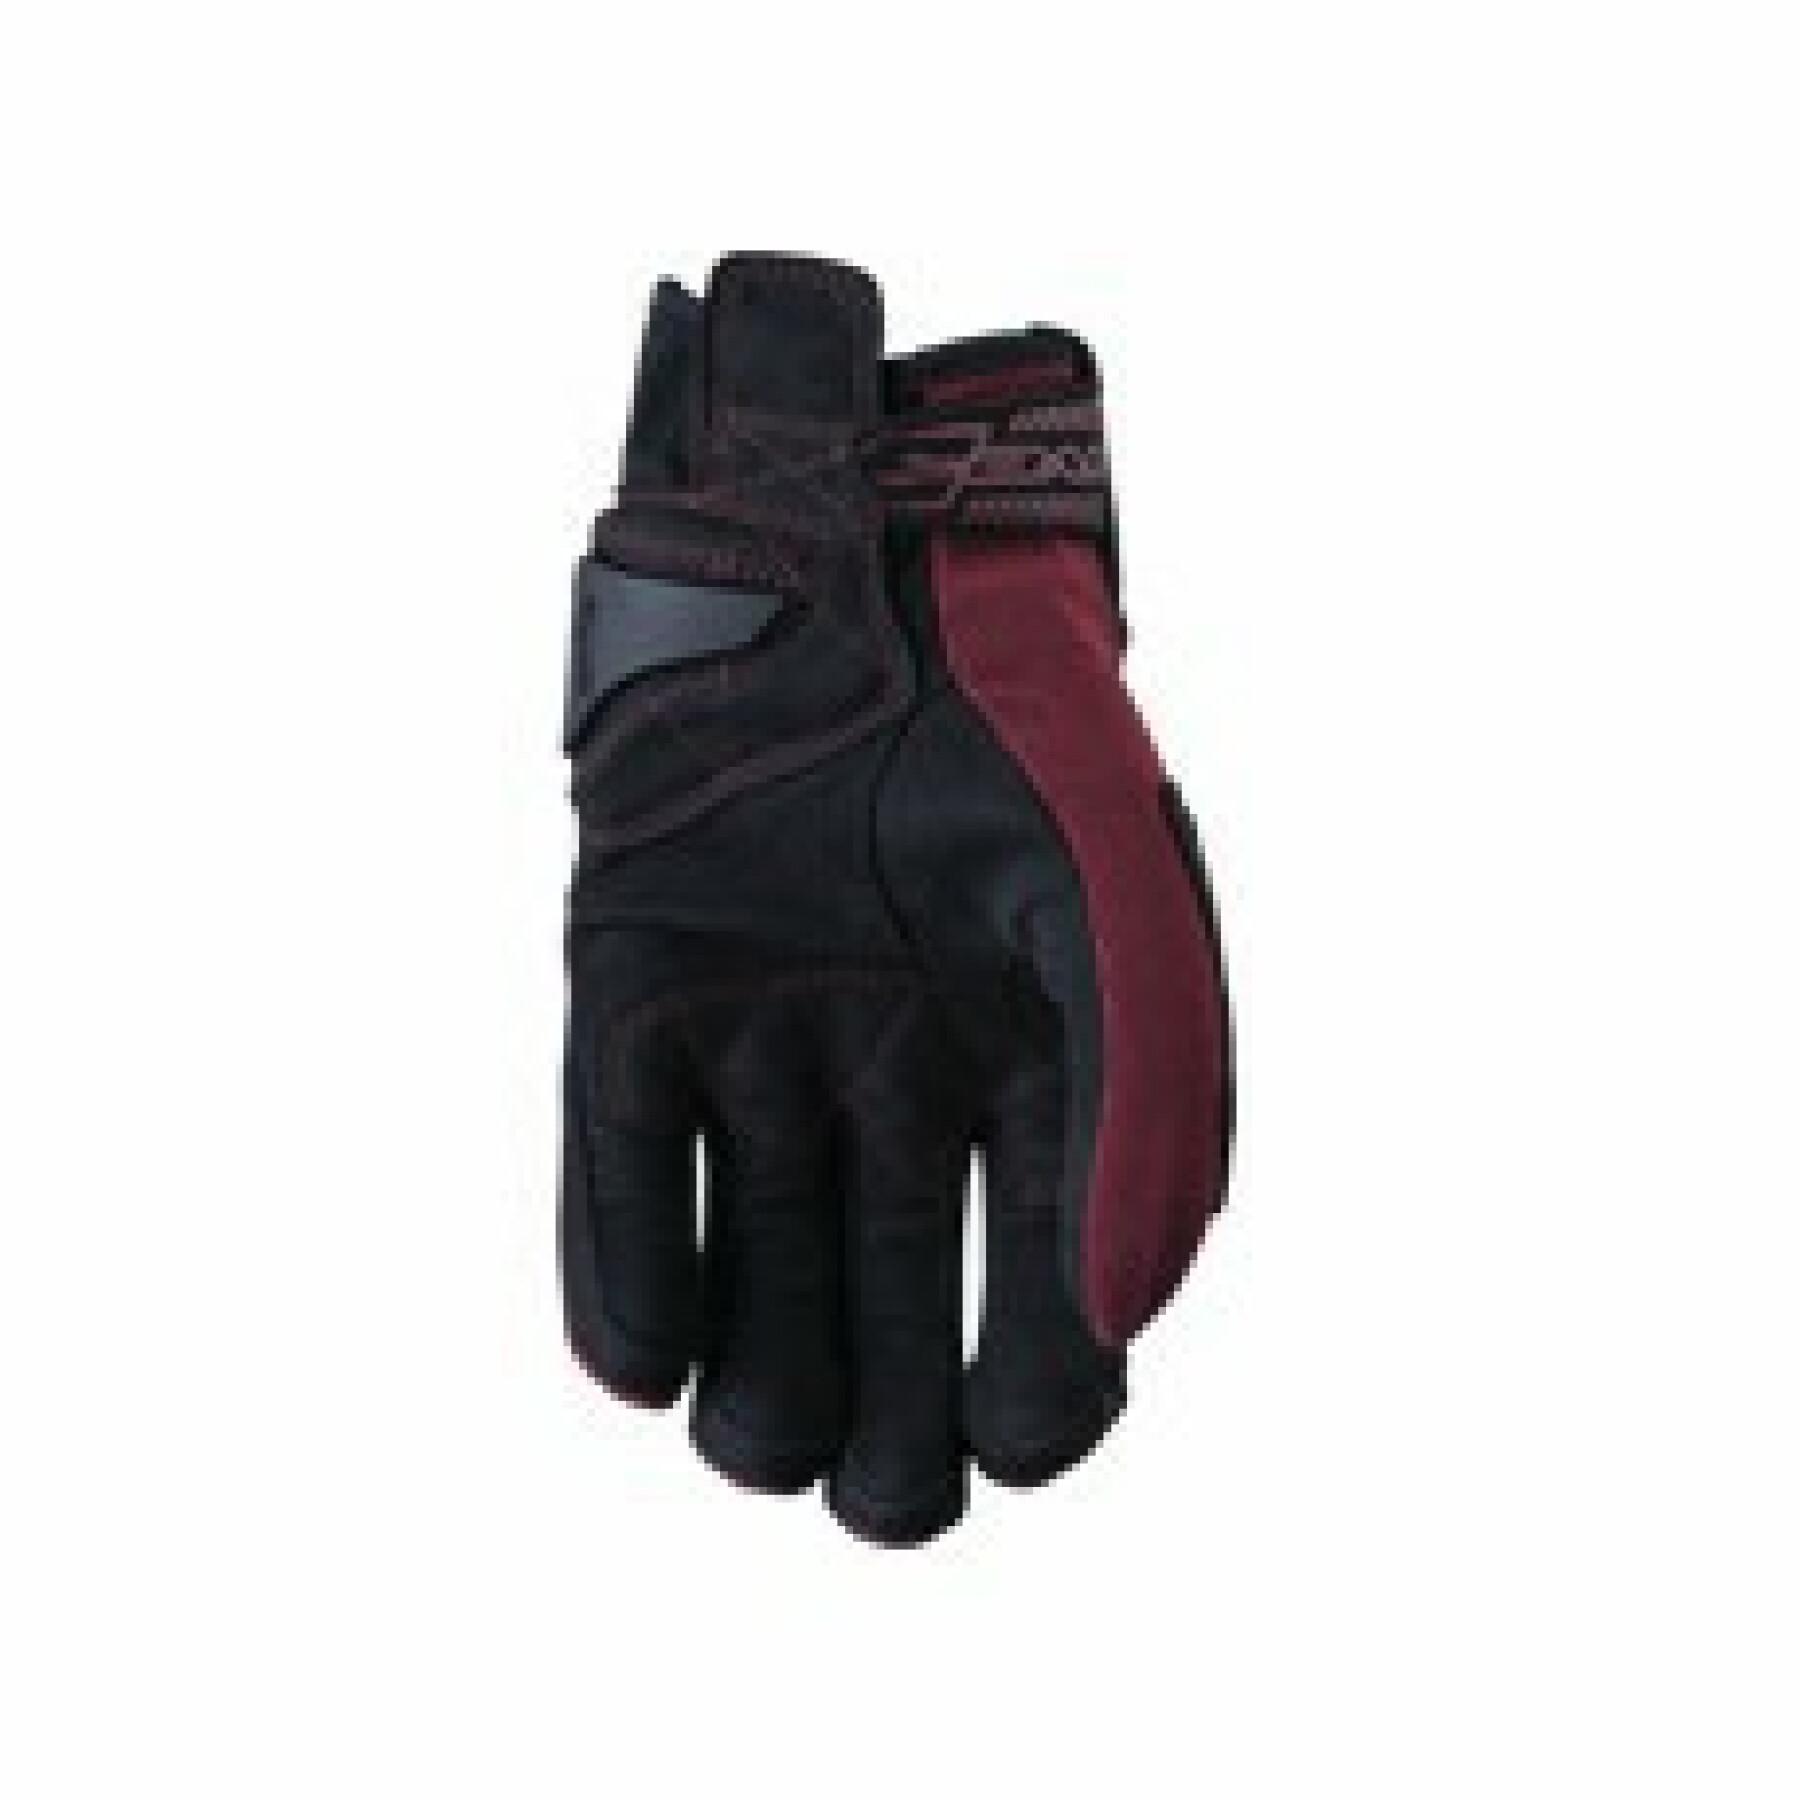 Motorcycle gloves summer woman Five RS3 10